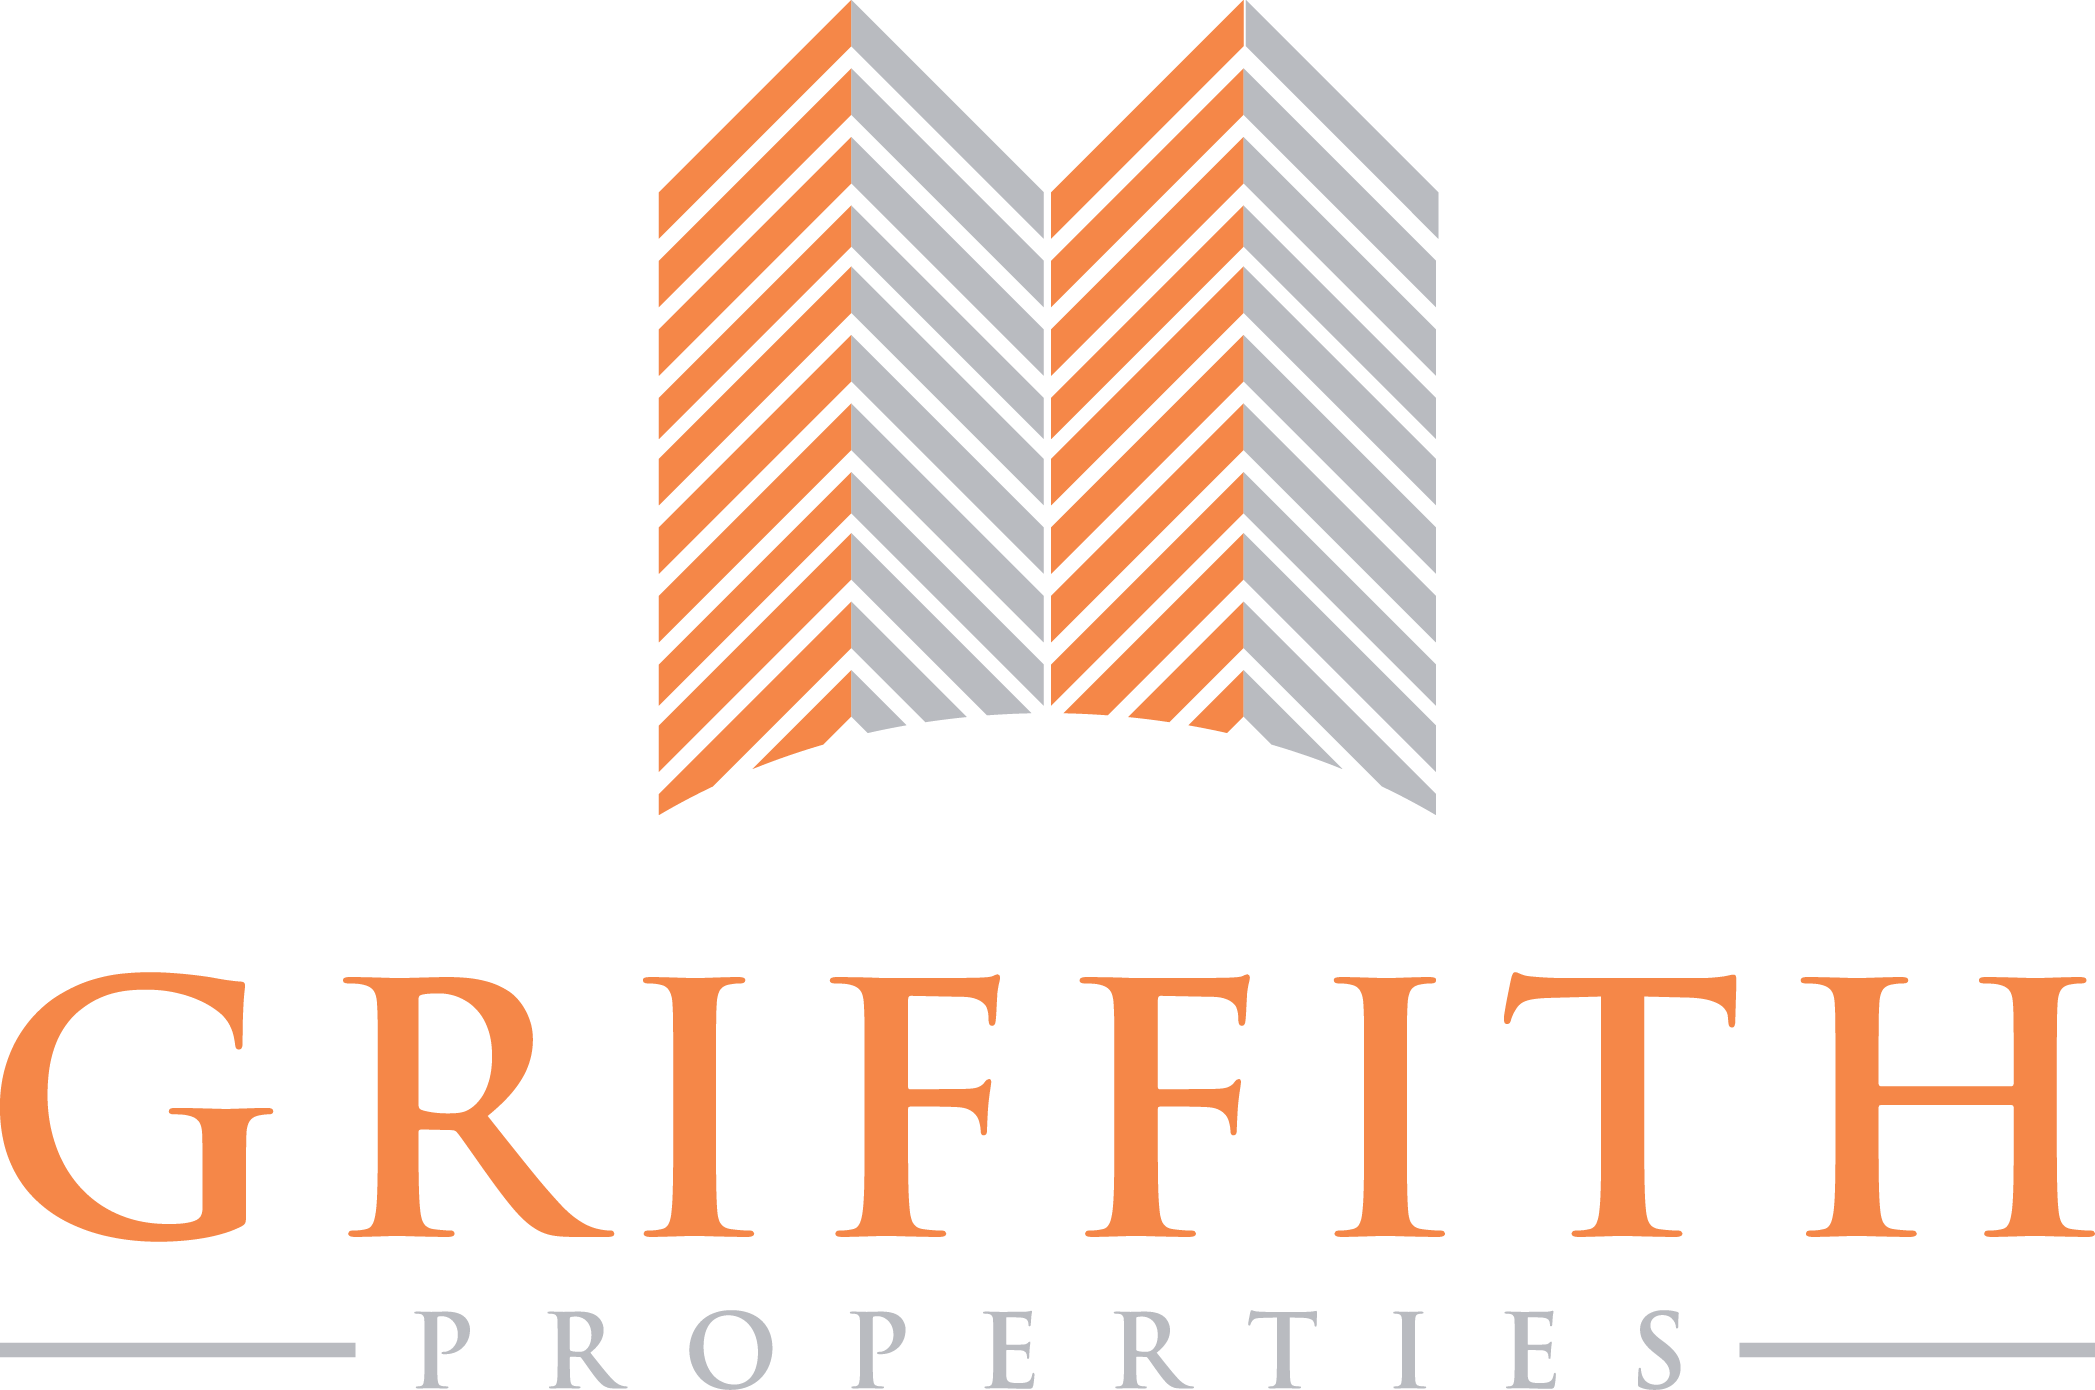 griffith properties logo